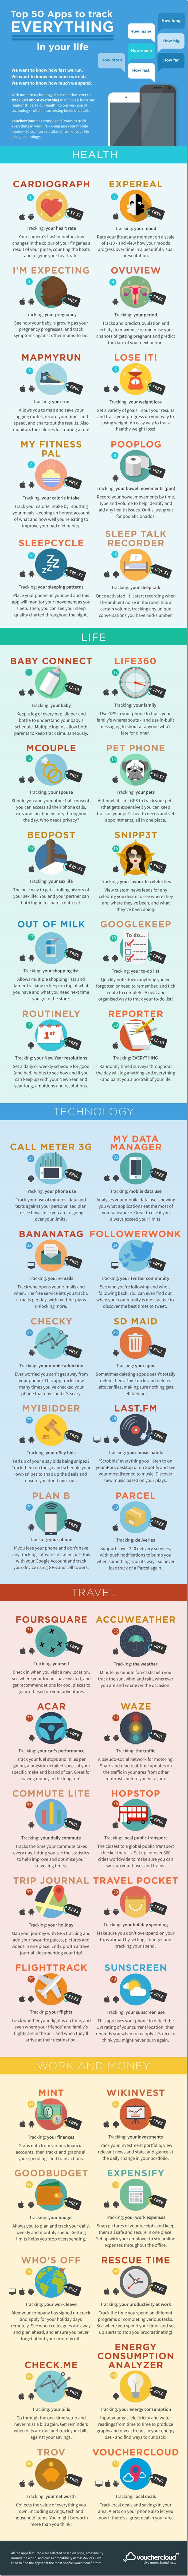 Email_instant_50_Apps_to_Track_Everything_infographic